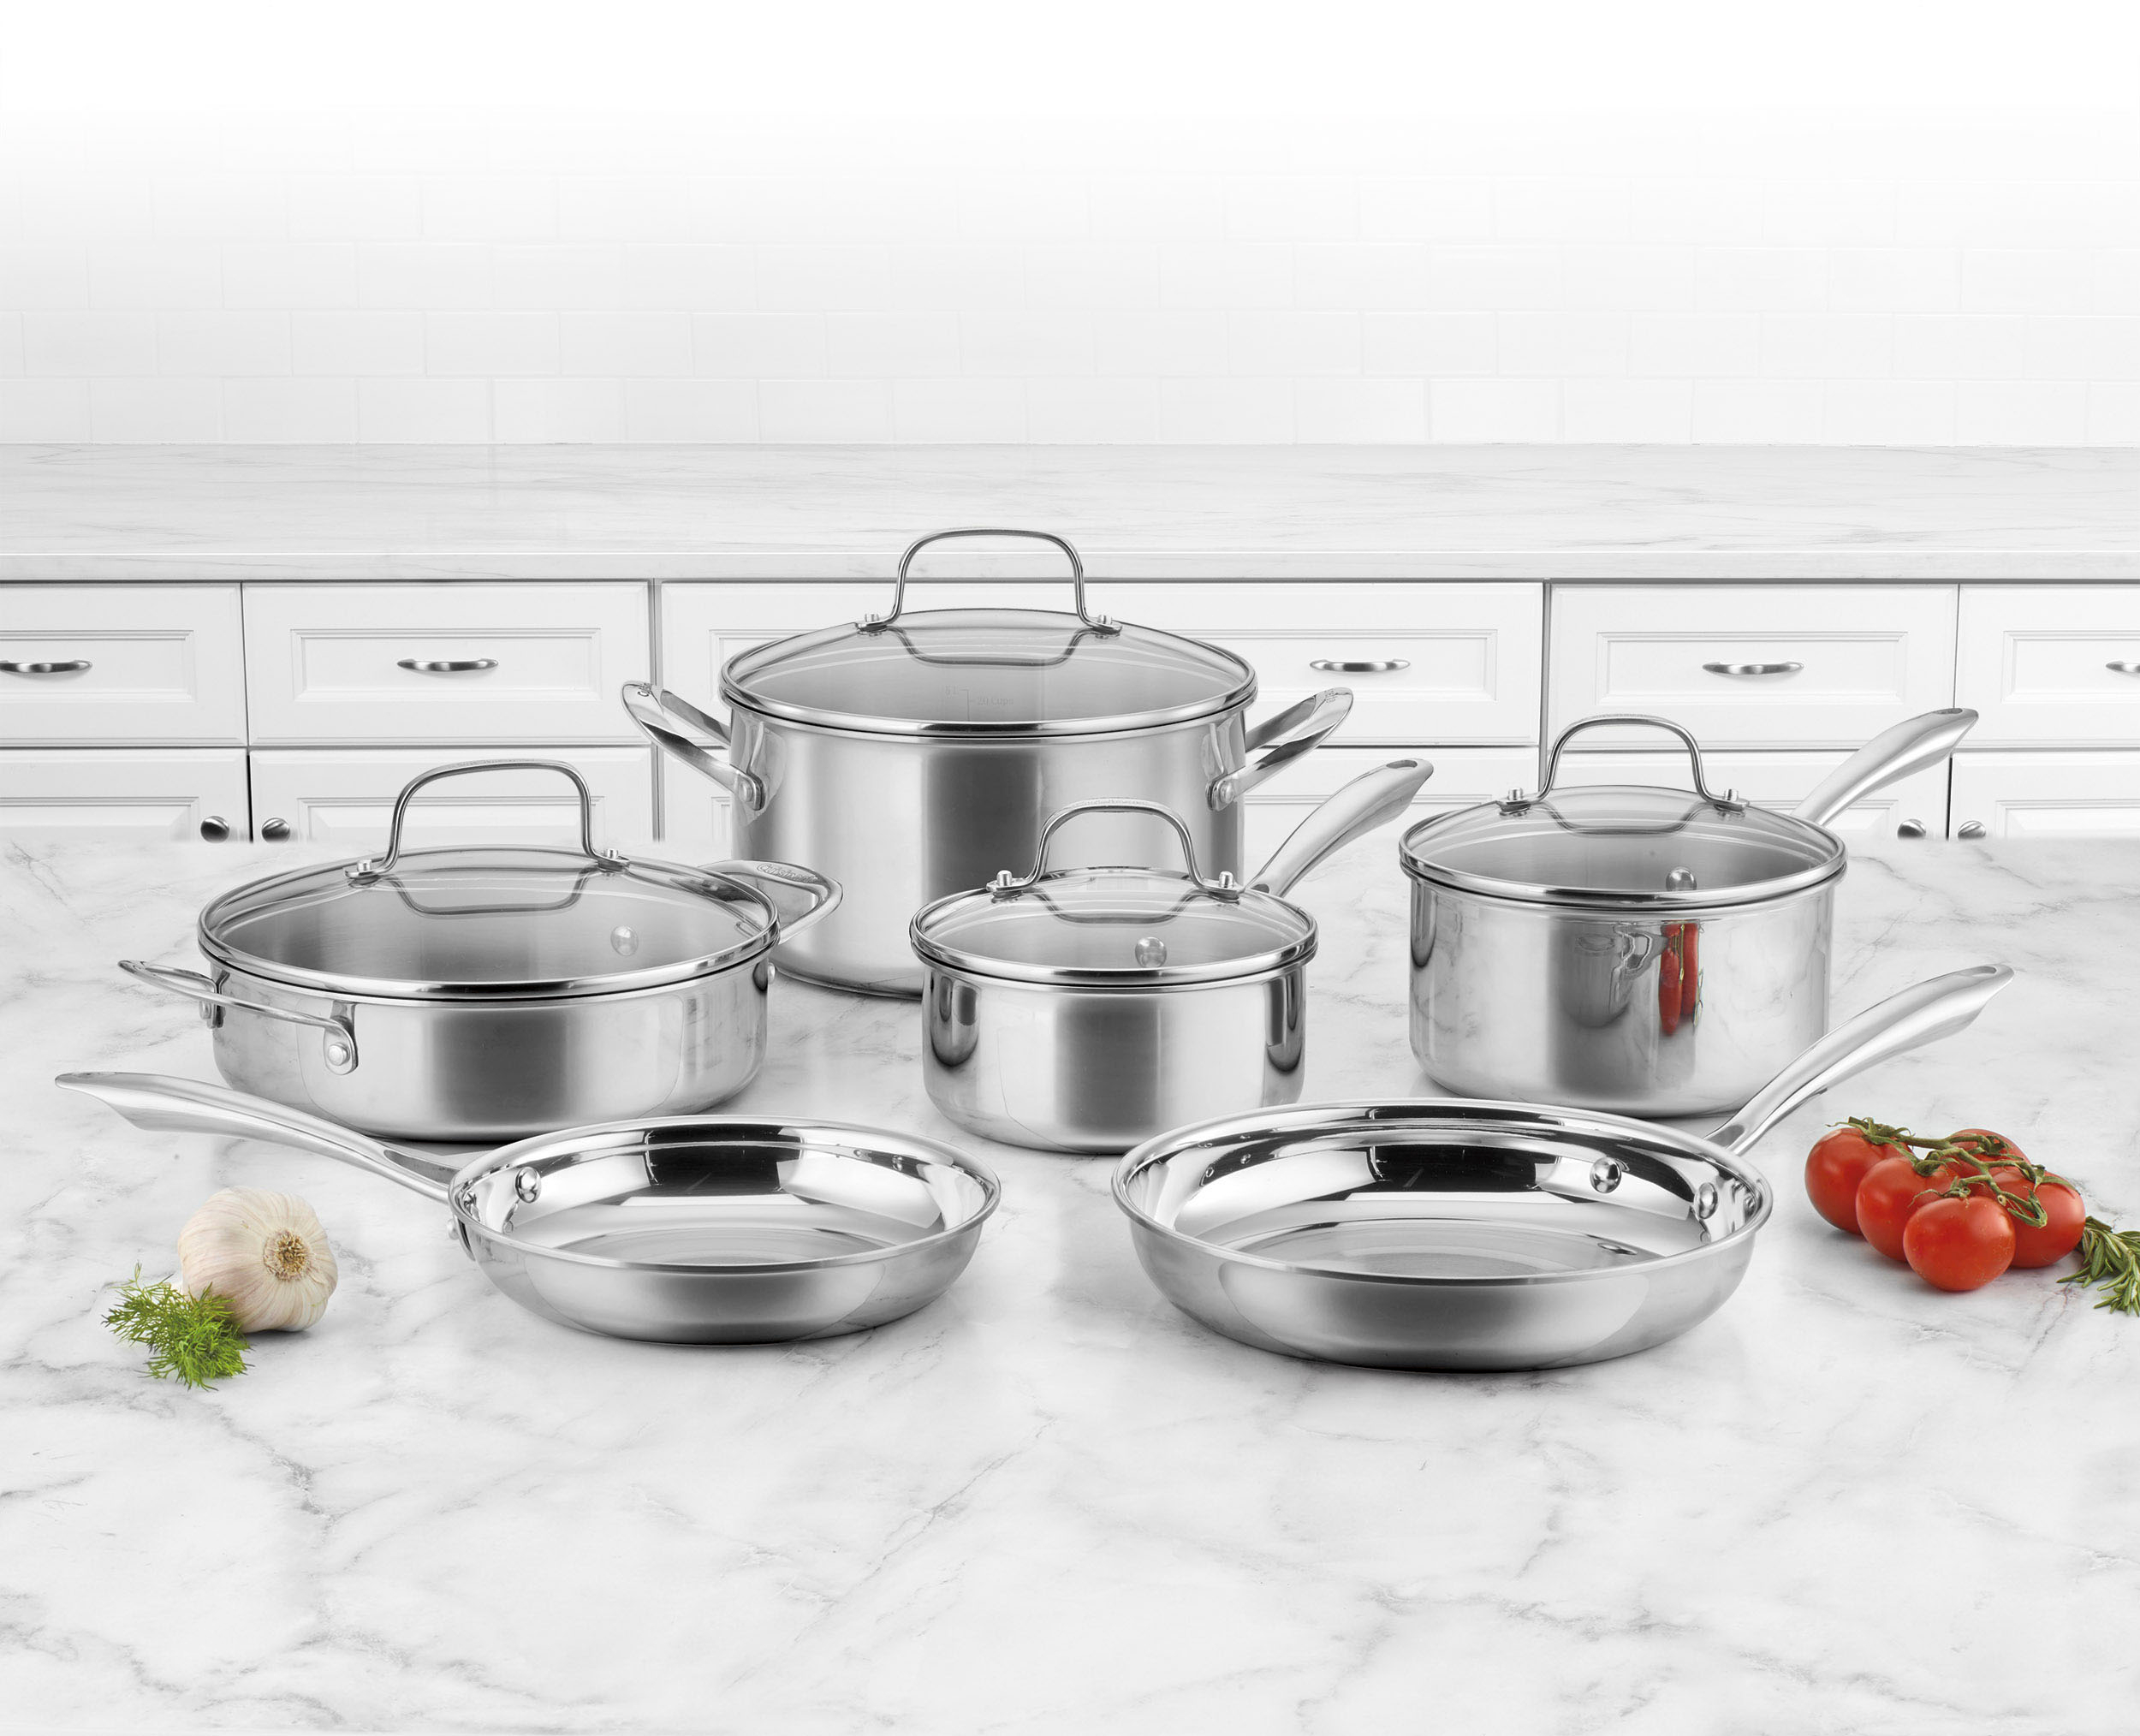 Food network TM 10-pc. tri-ply stainless steel cookware set  Food network  recipes, Cookware set stainless steel, Cookware set